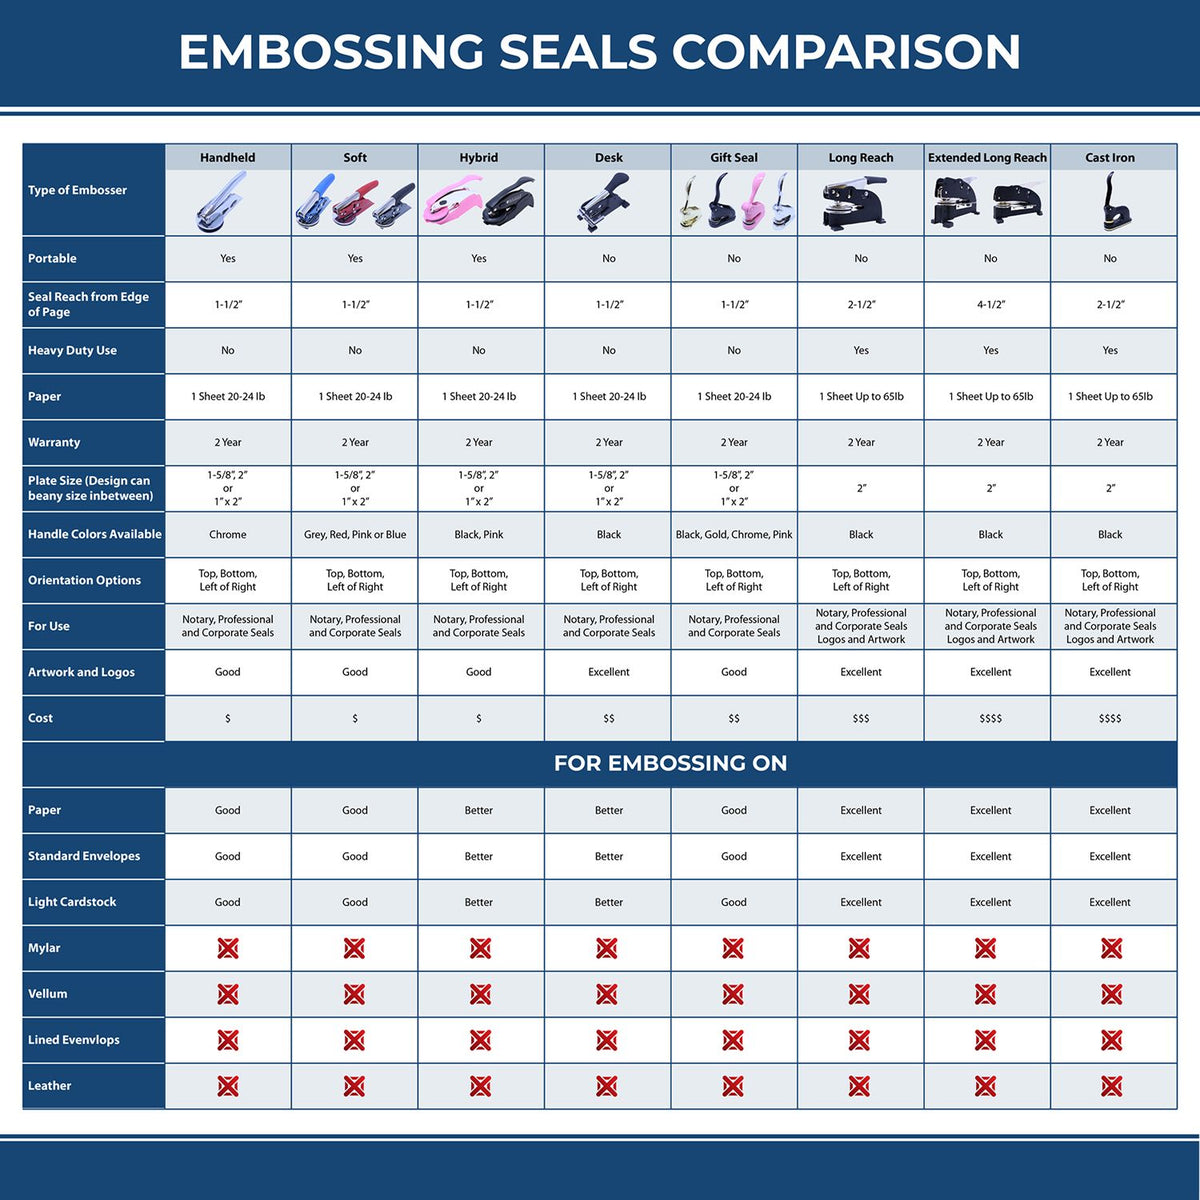 A comparison chart for the different types of mount models available for the Heavy Duty Cast Iron Colorado Geologist Seal Embosser